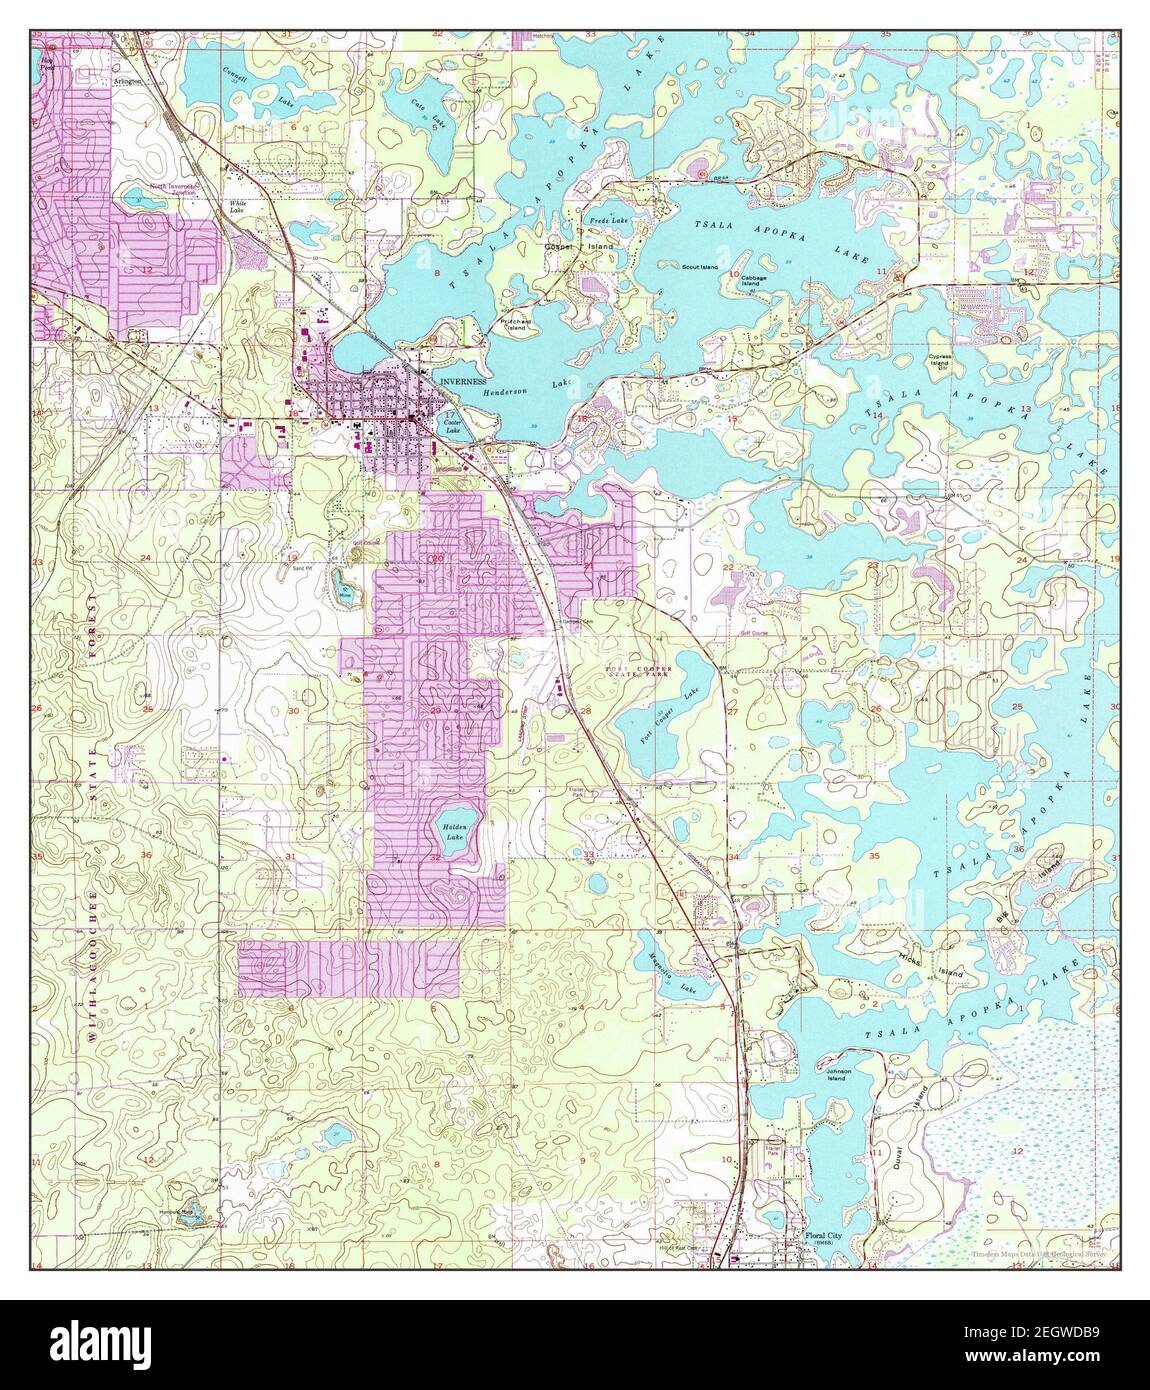 Inverness, Florida, map 1954, 1:24000, United States of America by Timeless Maps, data U.S. Geological Survey Stock Photo